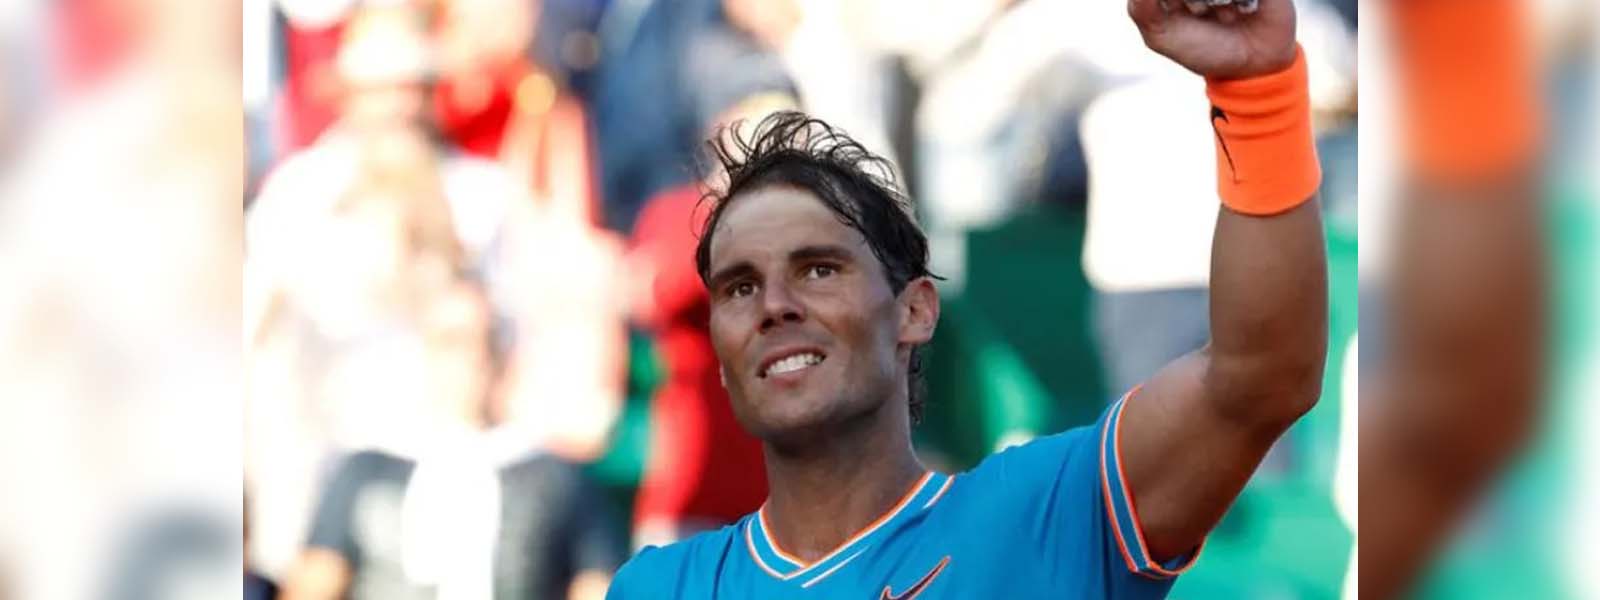 Nadal shines in comfortable victory over Ferrer